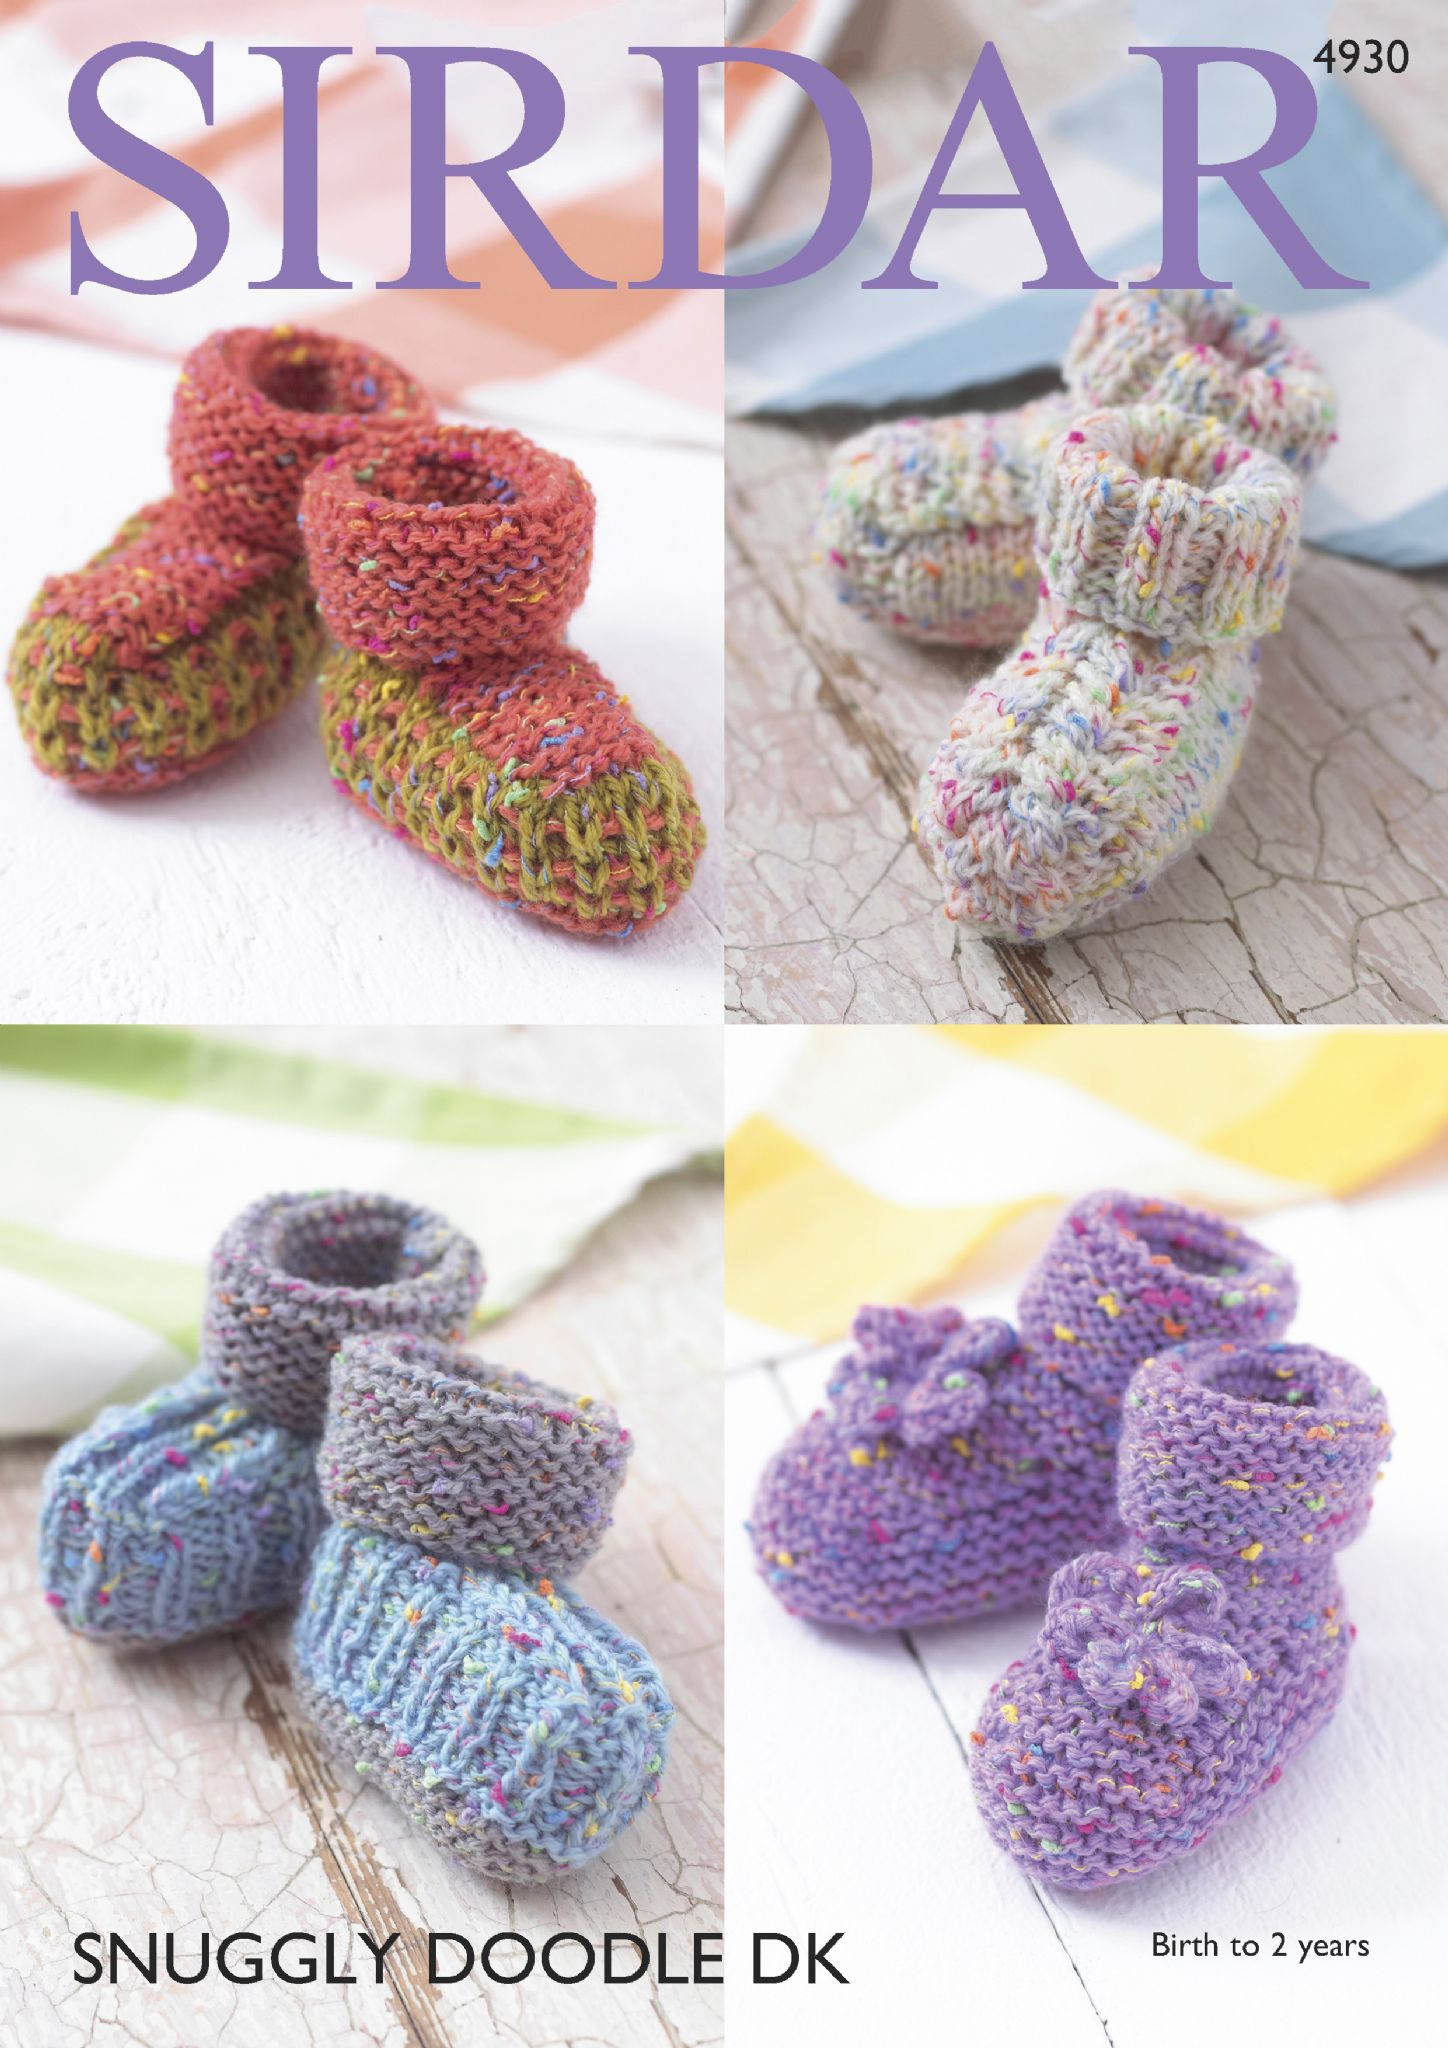 Sirdar Snuggly Knitting Patterns Sirdar Snuggly Doodle Dk 4930 Bootees Knitting Pattern